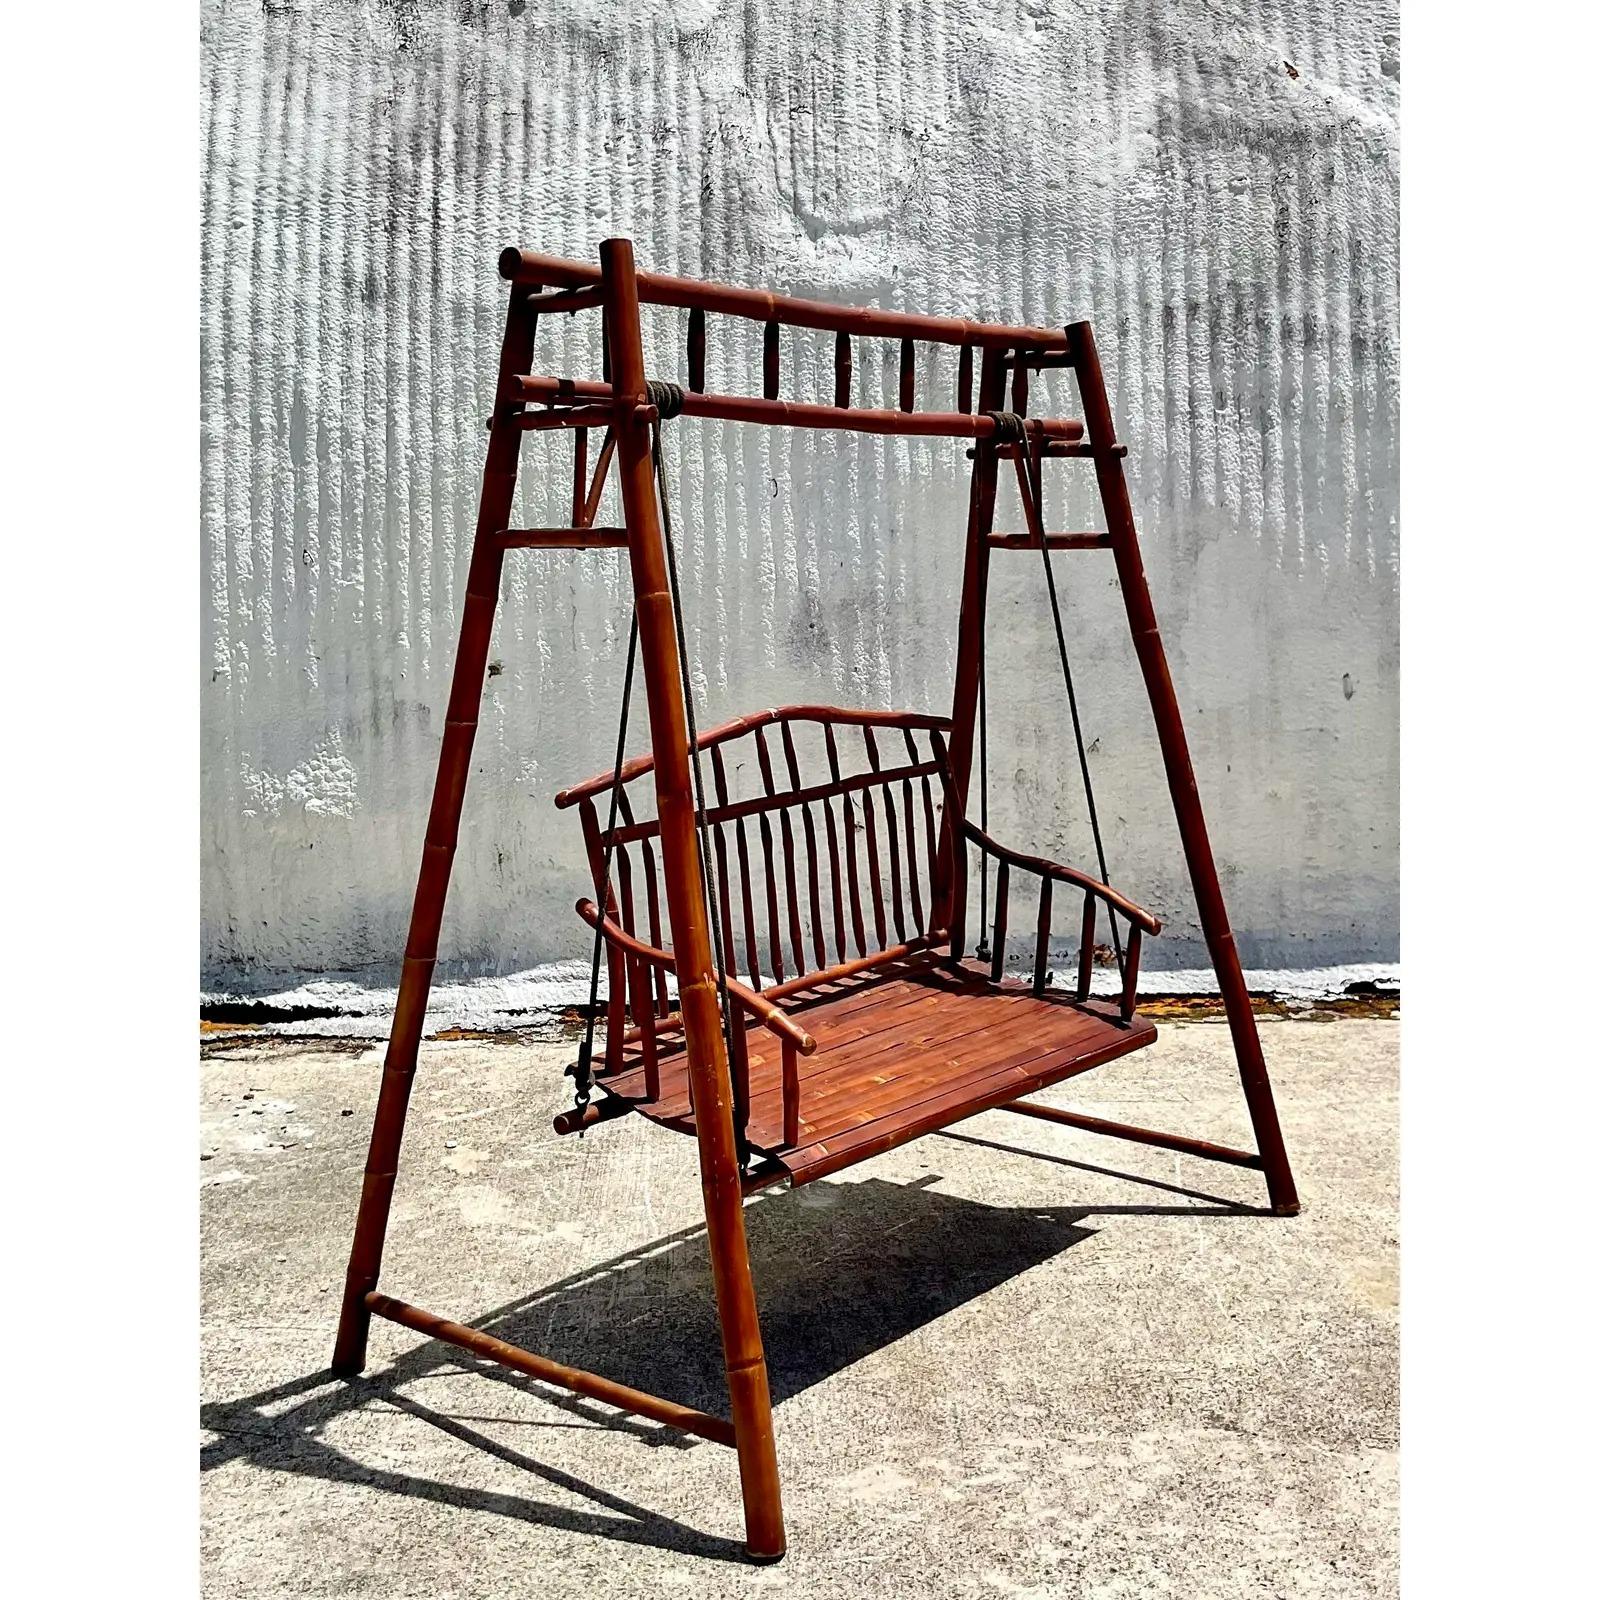 Fantastic vintage bamboo and rattan outdoor porch swing. Beautiful elephant rattan in a monumental size. Acquired from Palm Beach estate.